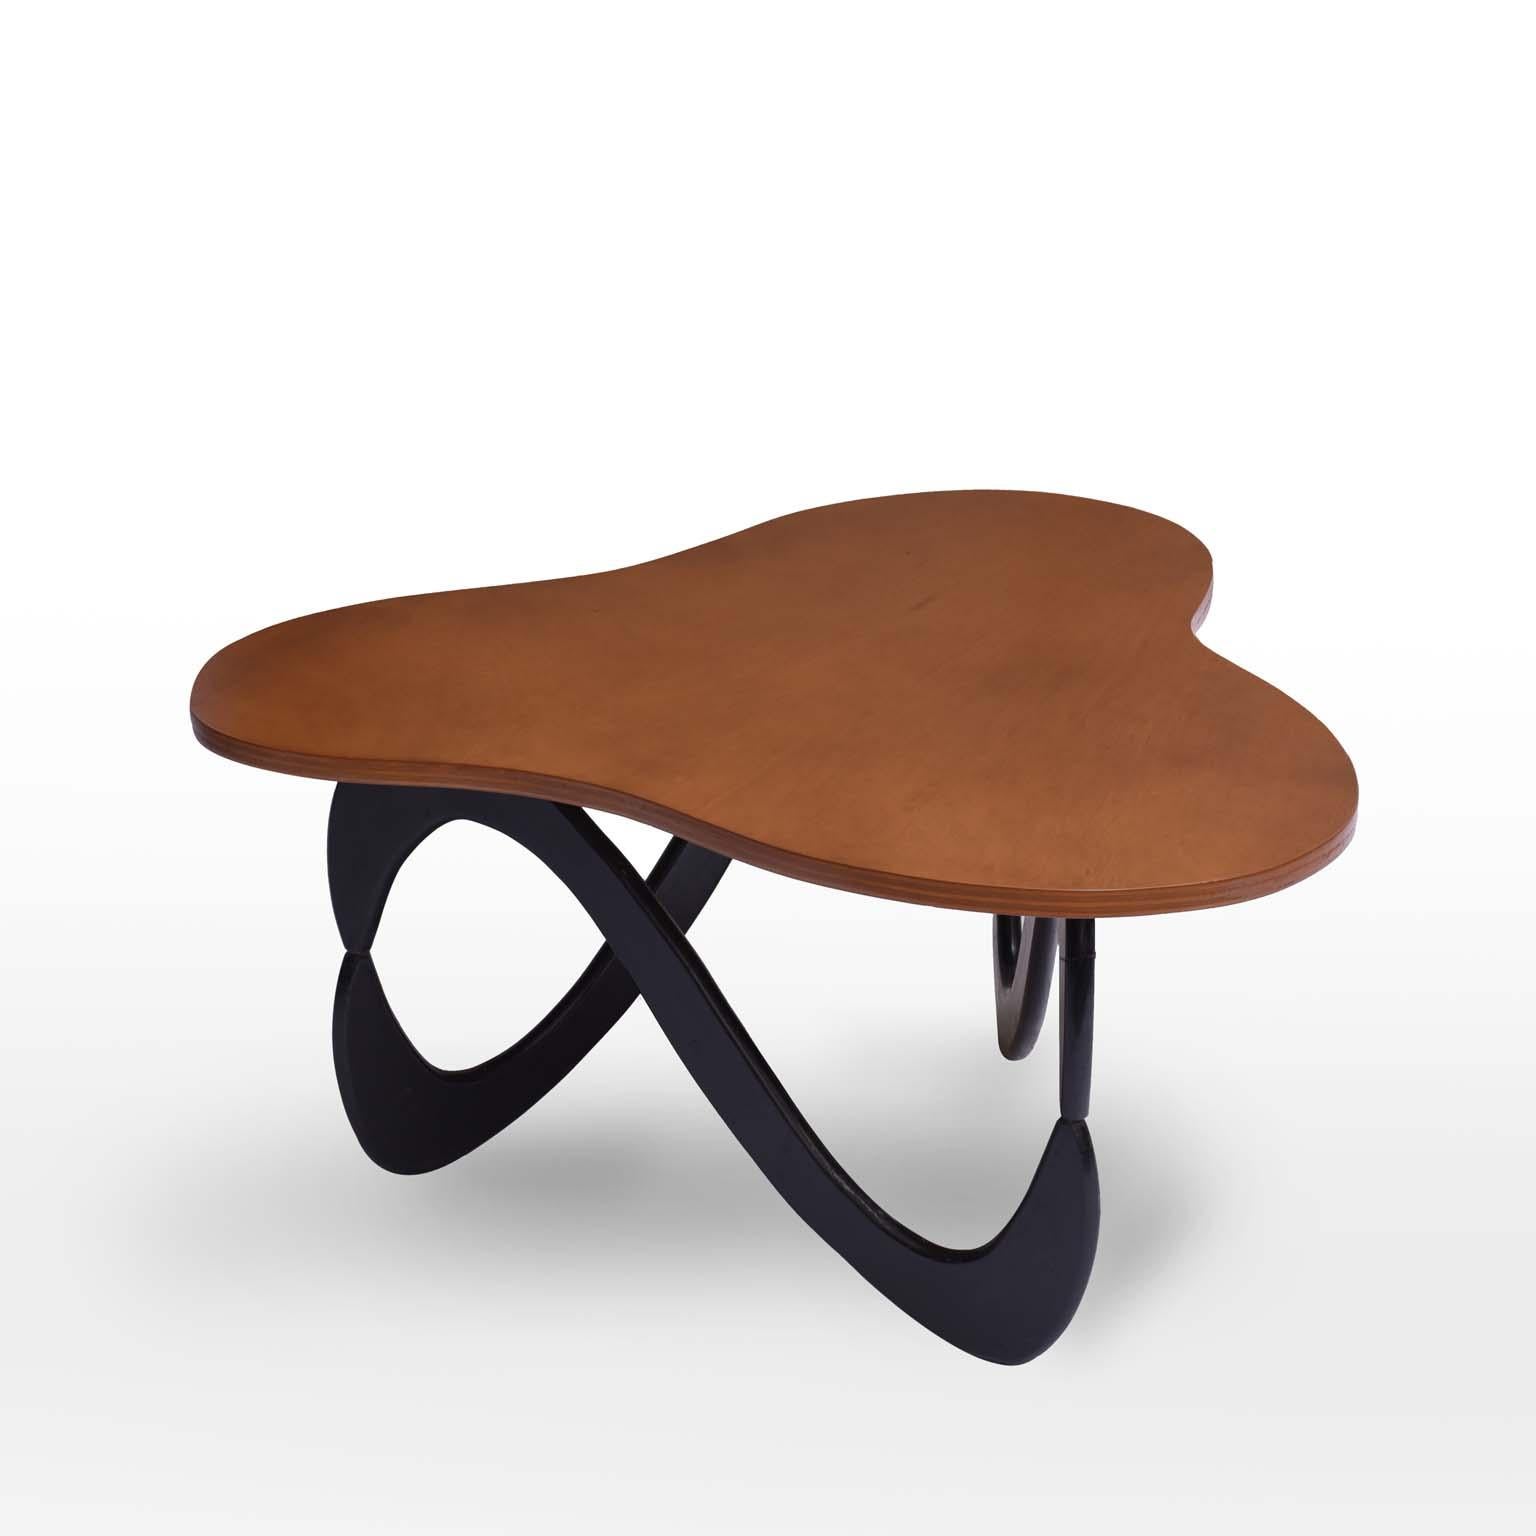 Zanine Caldas midcentury Brazilian center table, 1950s

Constructed in plywood, this comfortable coffee table was designed by Zanine Caldas during the period he worked on Móveis Artísticos Z.